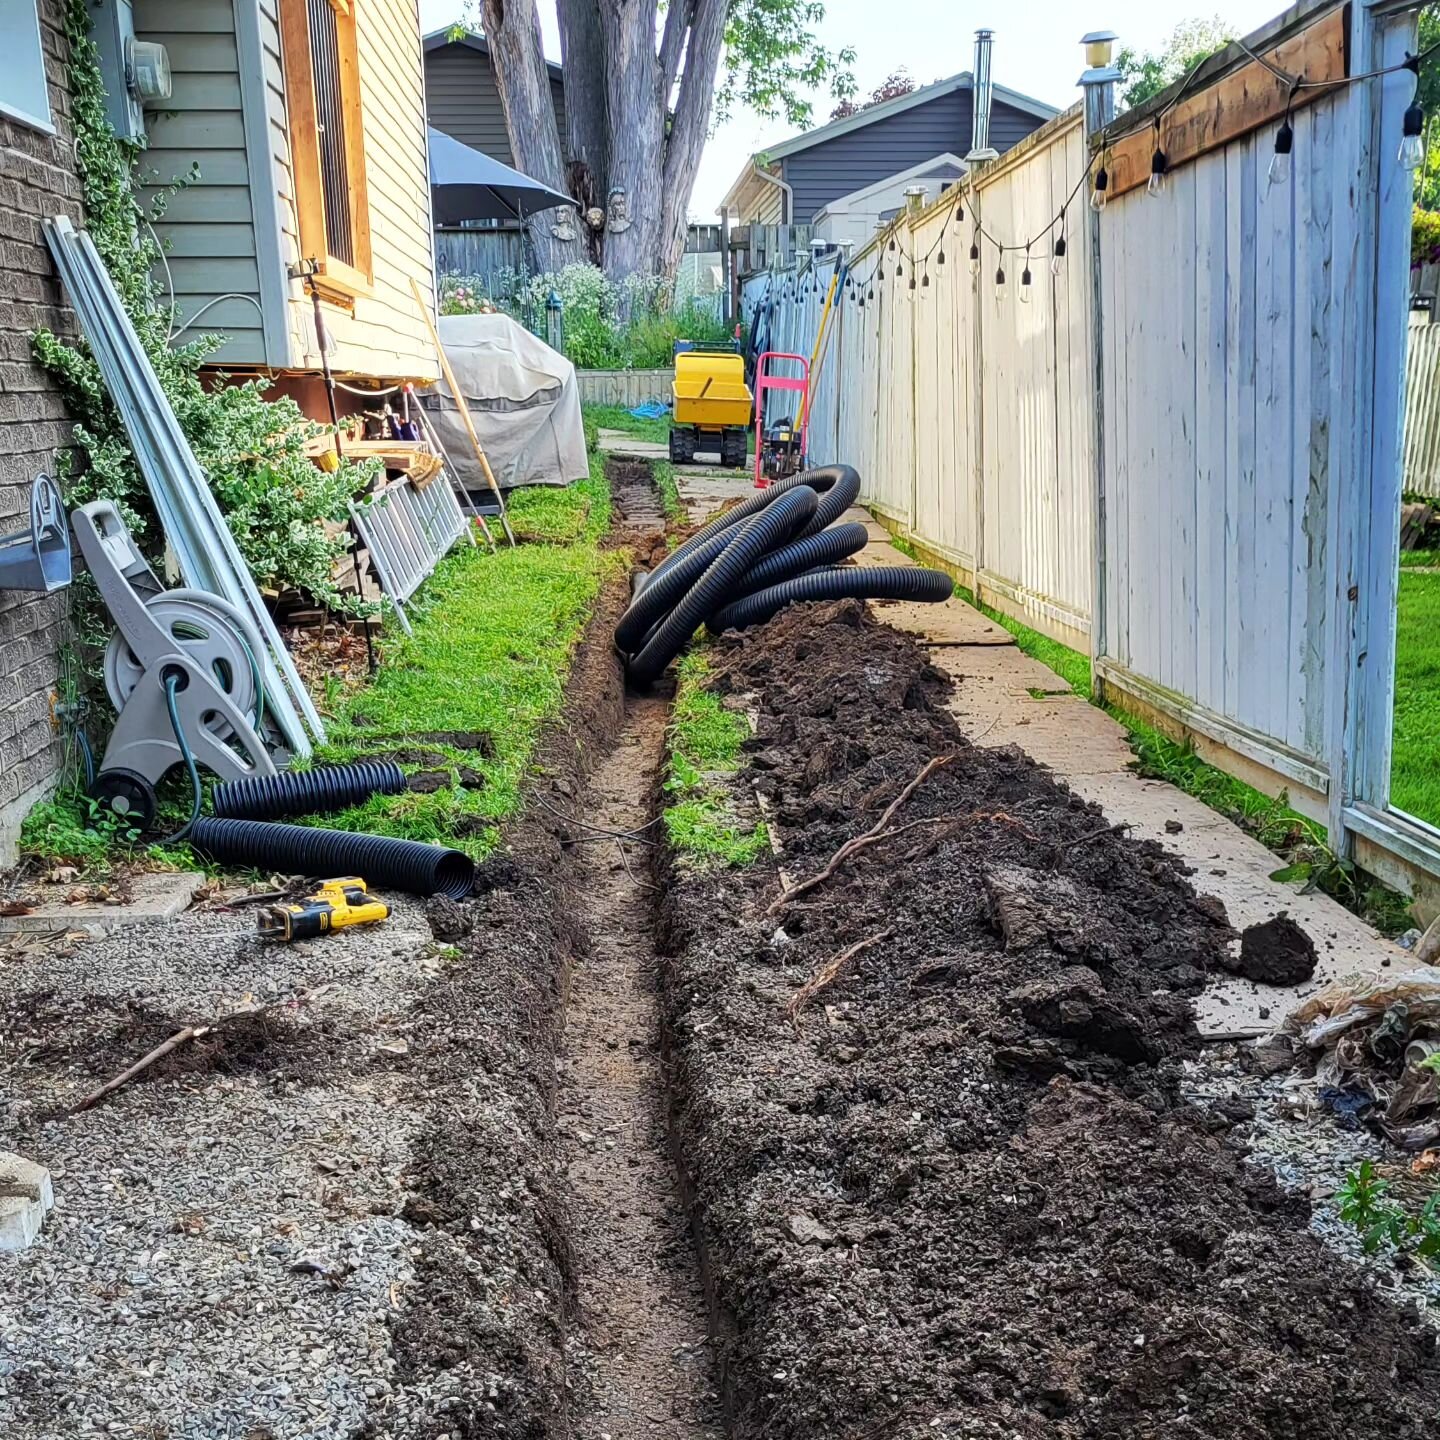 Rain...heat....repeat. This home got a French drain and buried downspouts in preparation for a fence install. We closed the job and staged next door for another job. We love the back to back jobs! #employeeappreciation #heatwave #customerexperience #